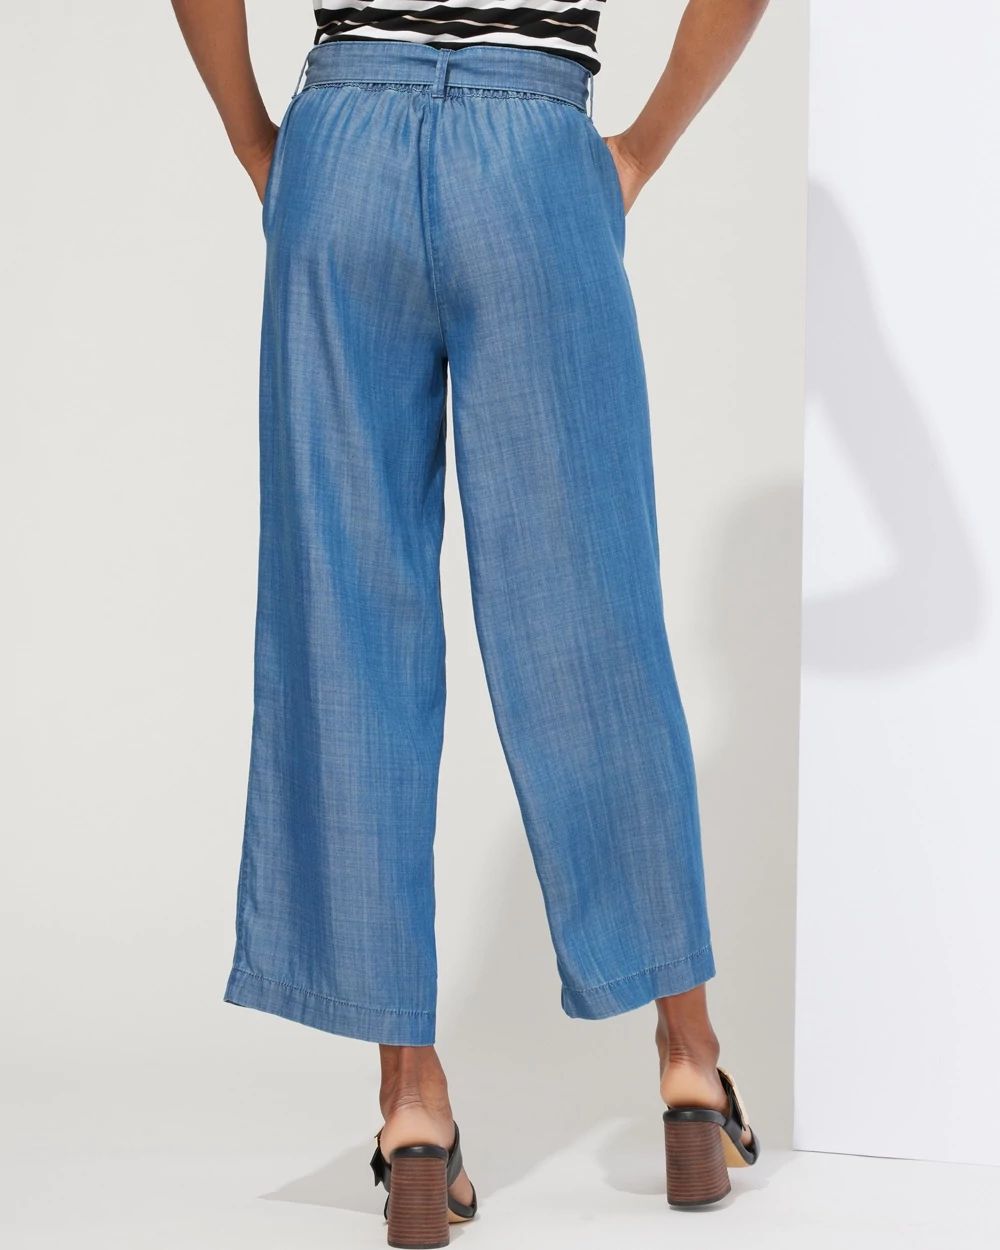 Outlet WHBM Tie-Belt Crop Pants click to view larger image.